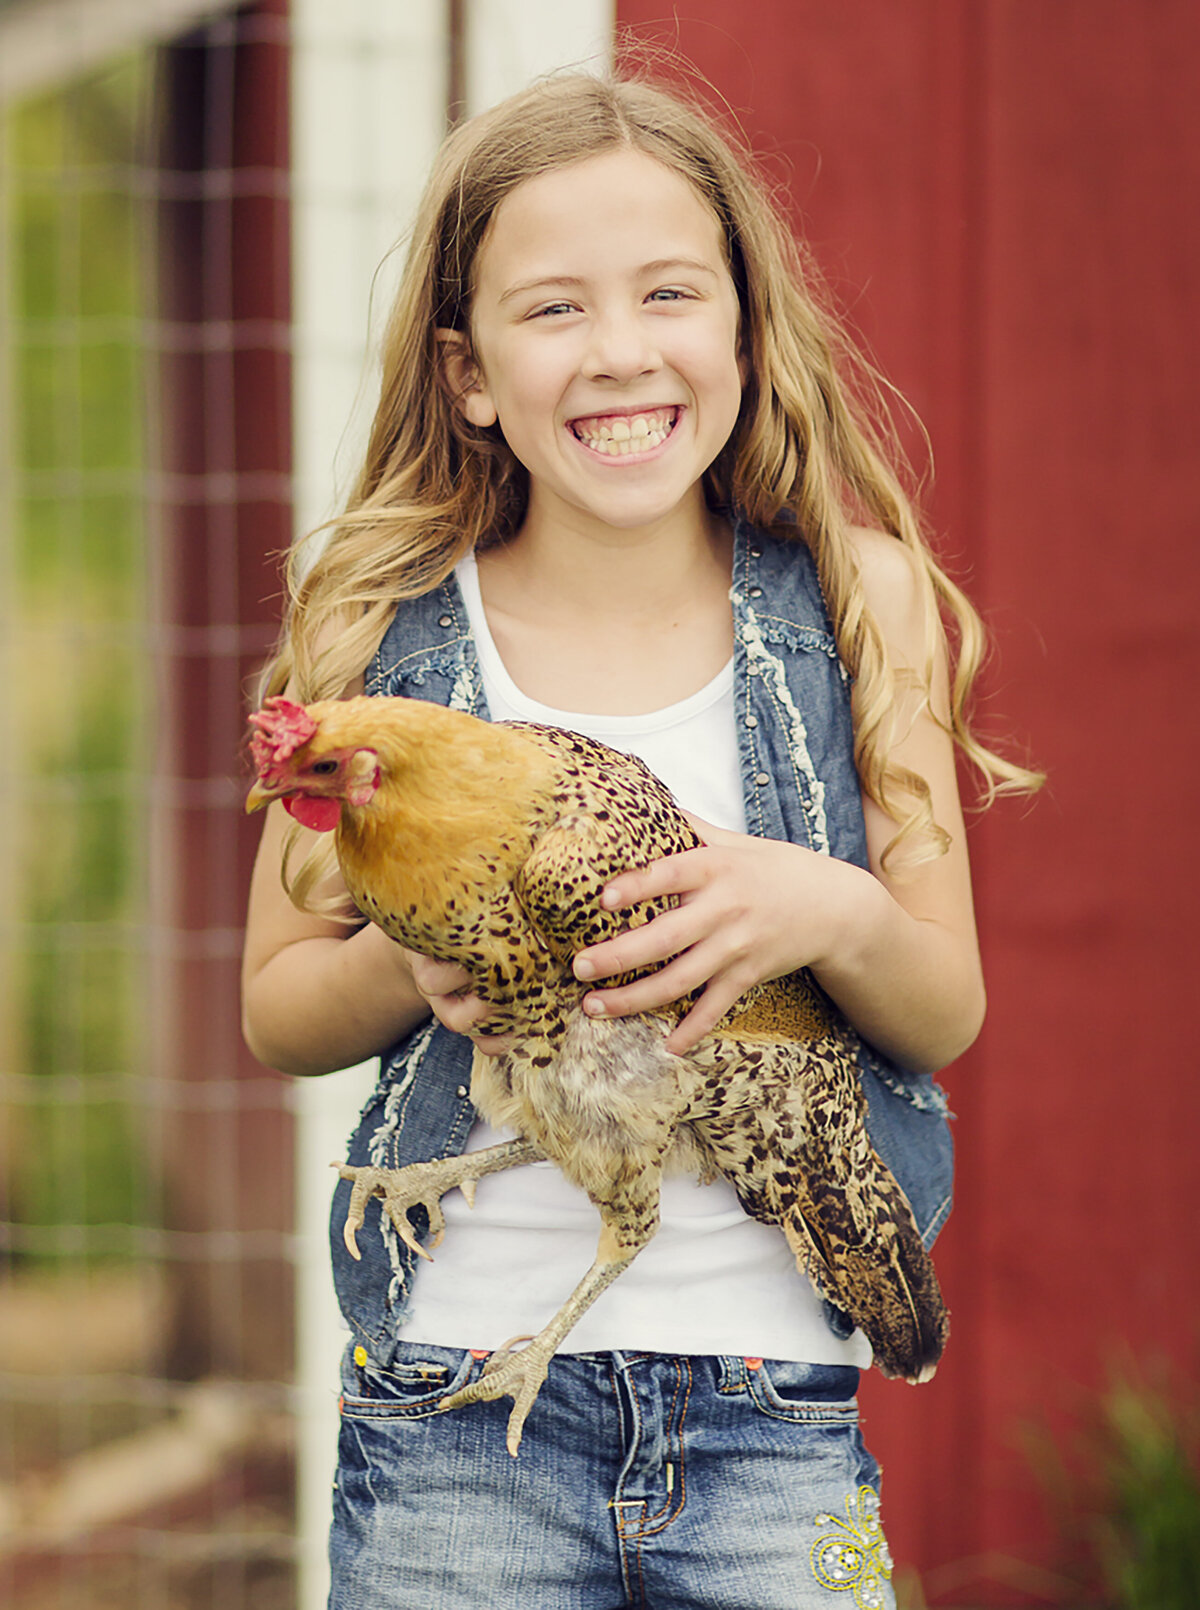 Tween girl at home on their farm holding a chicken with a red barn behind her.